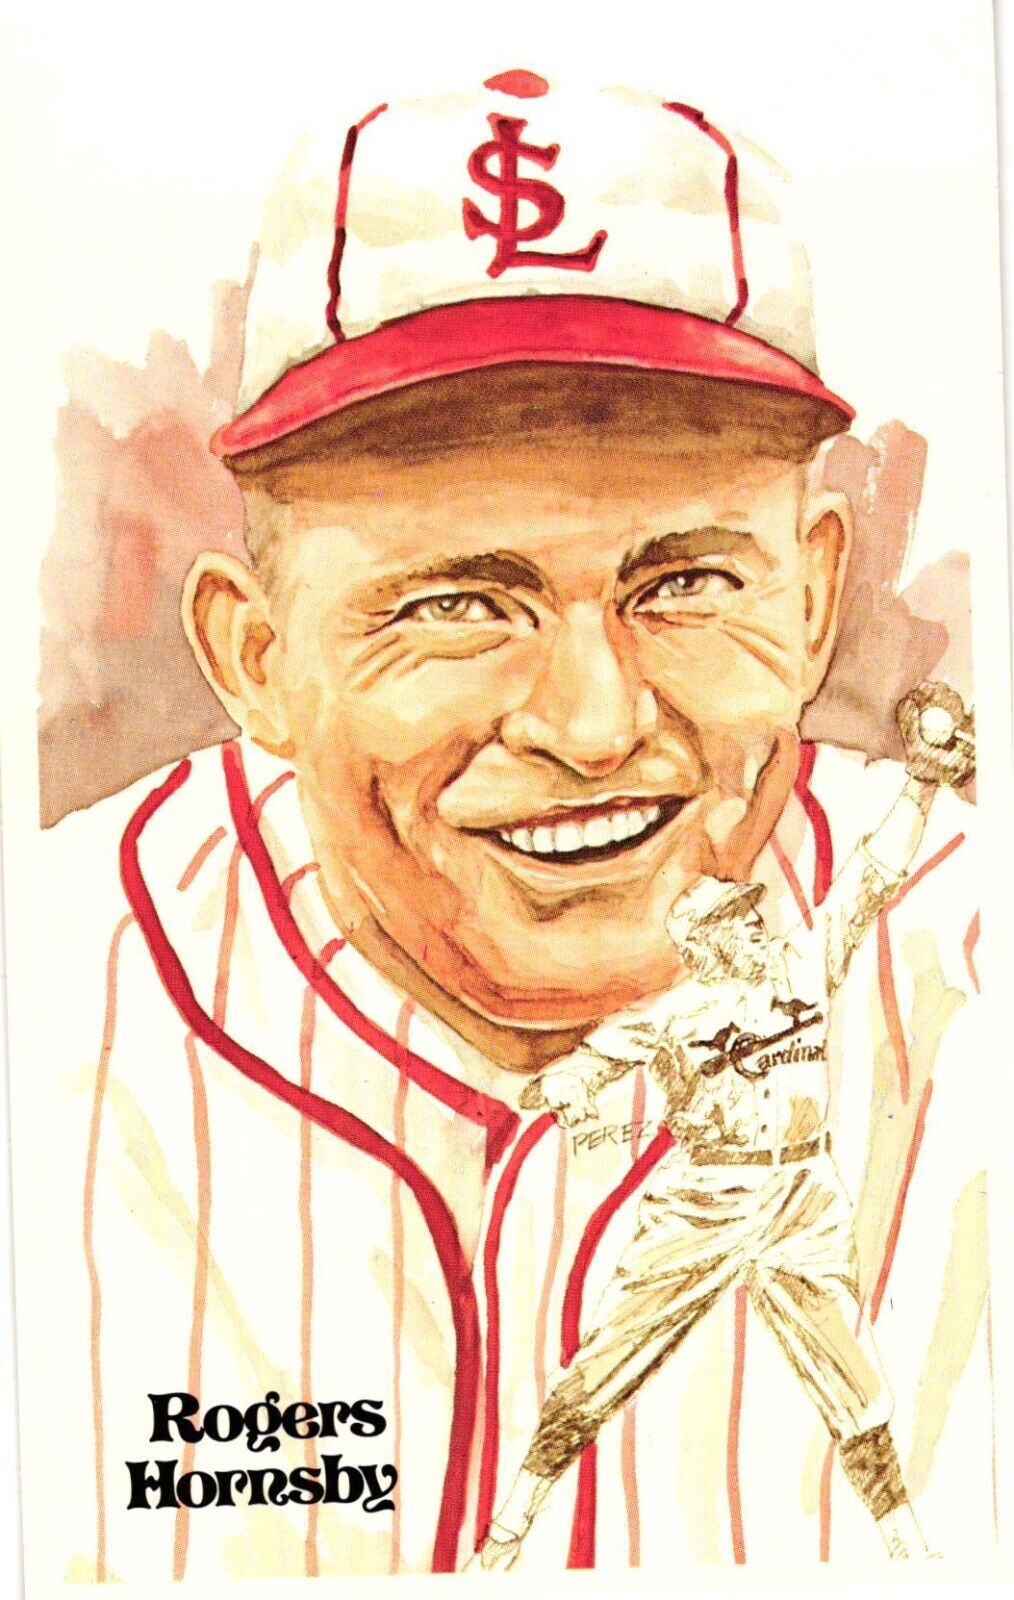 Rogers Hornsby 1980 Perez-Steele Baseball Hall of Fame Limited Edition Postcard